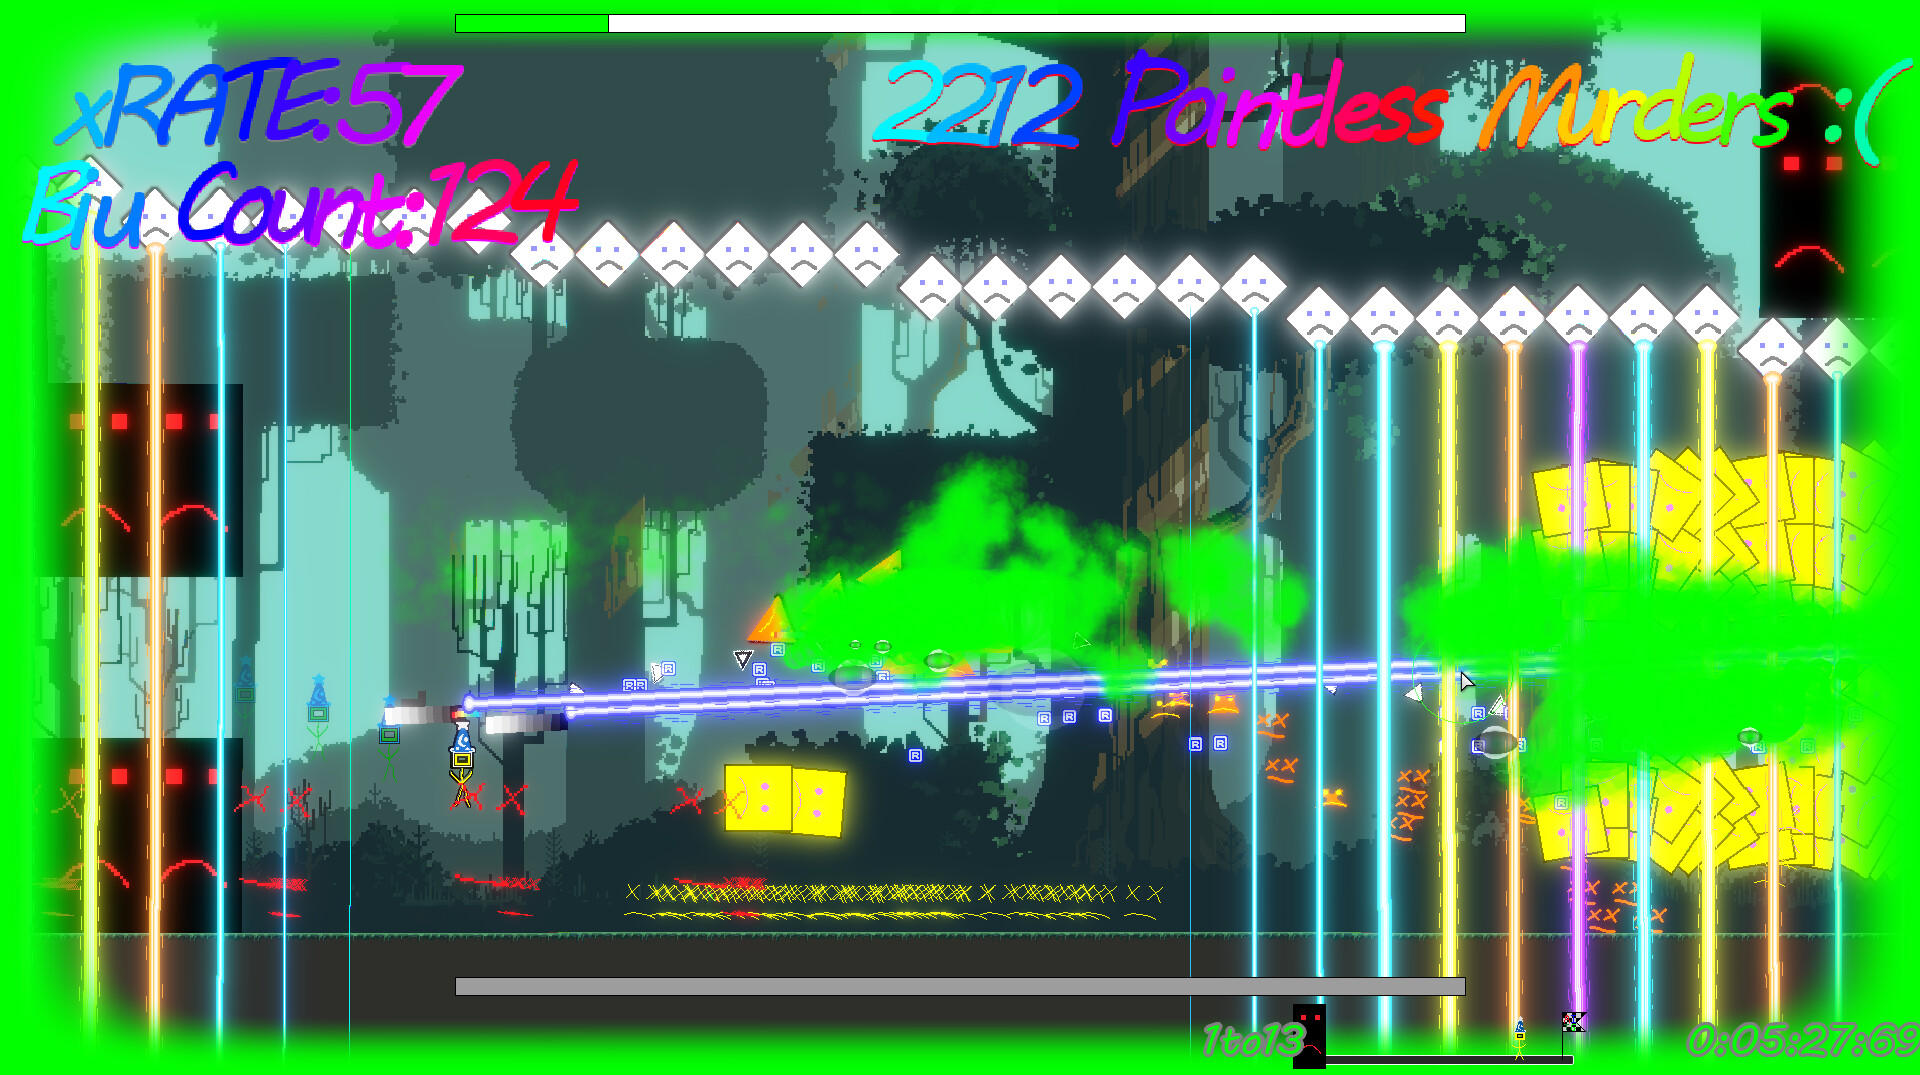 A2C:Ayry seems to be playtesting a 2D runner shooter from Cci ภาพหน้าจอเกม